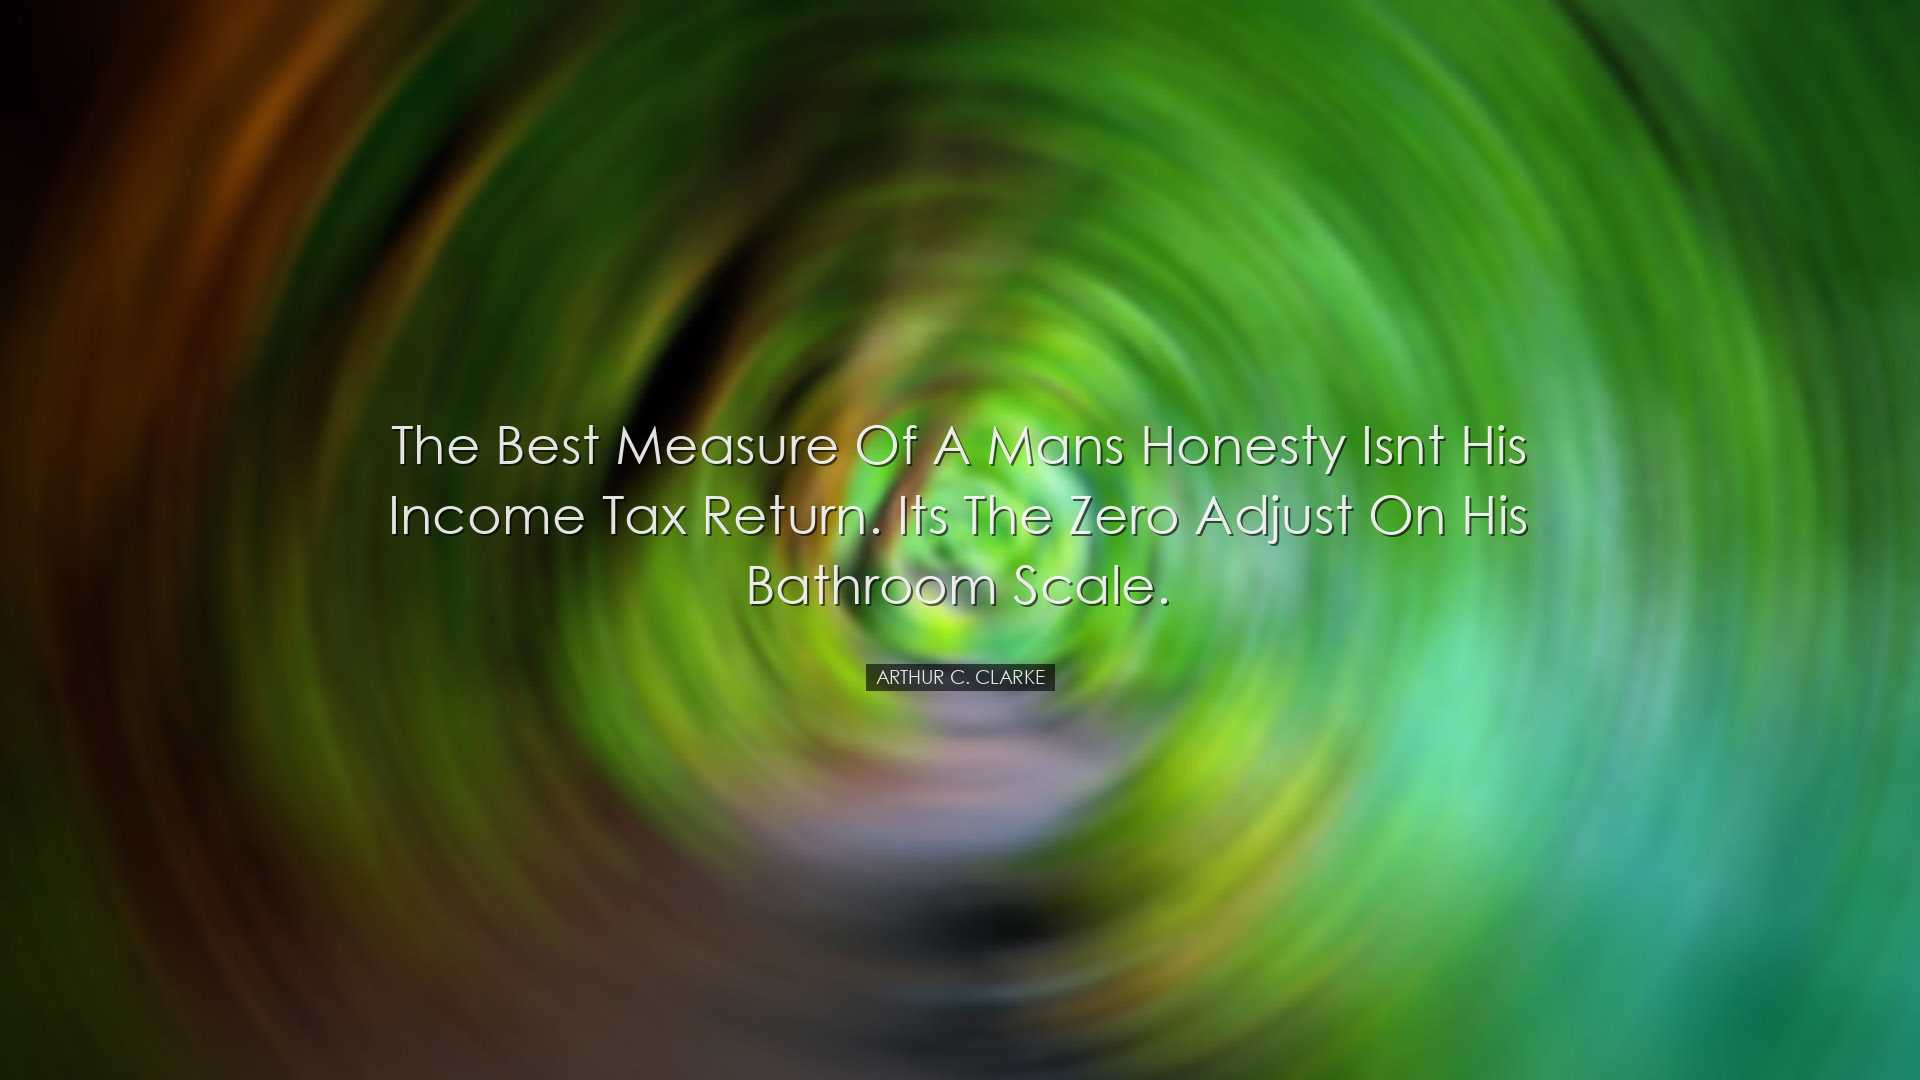 The best measure of a mans honesty isnt his income tax return. Its